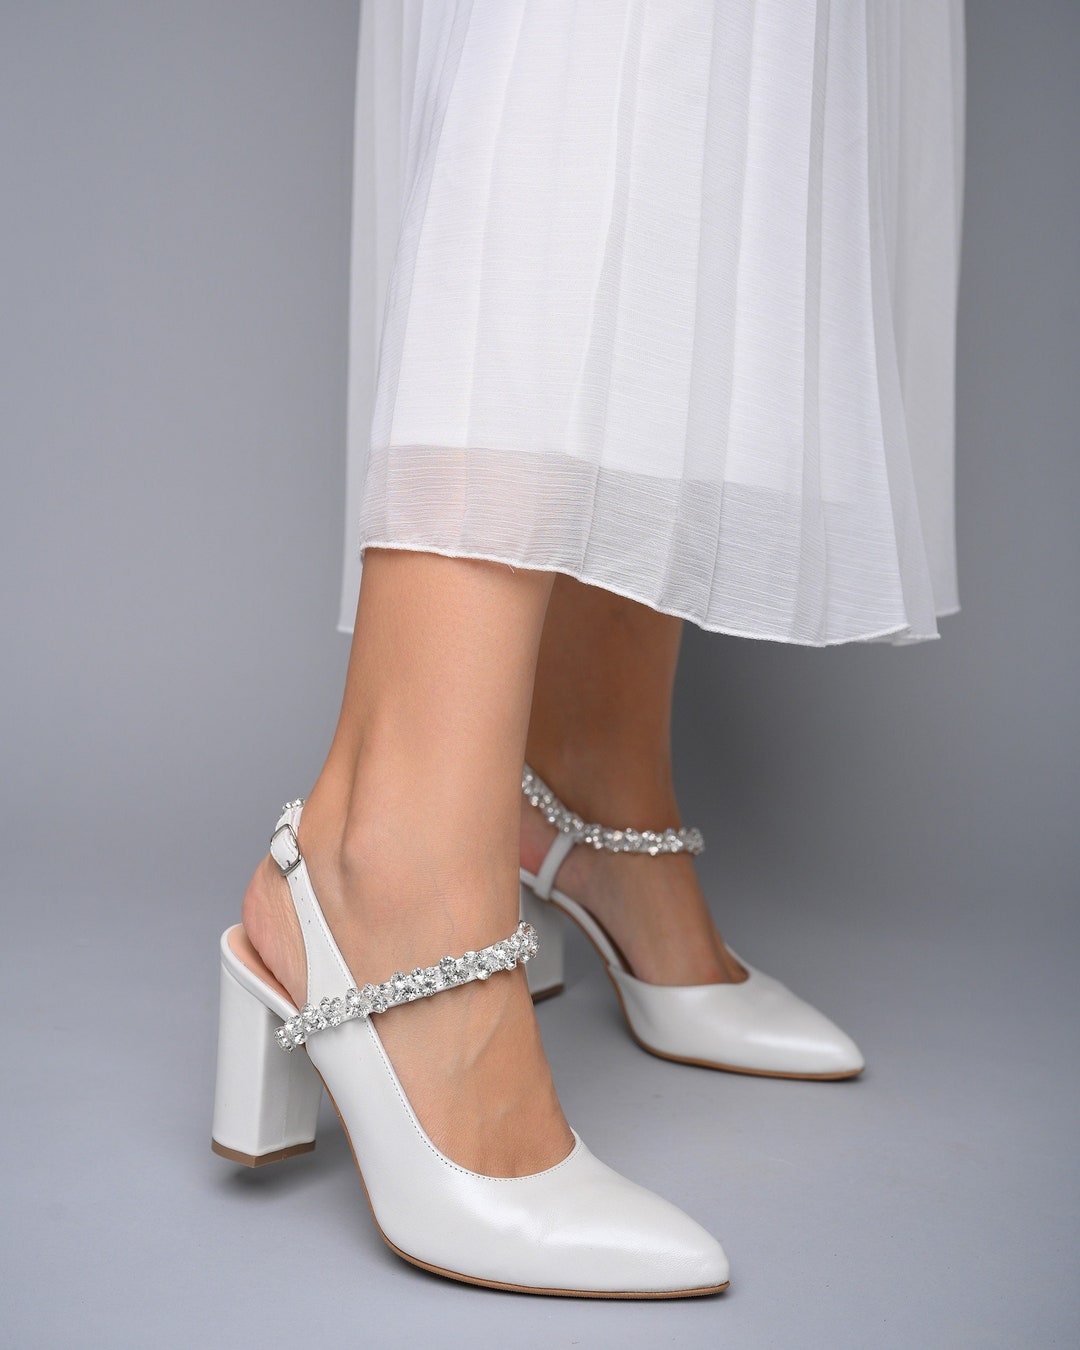 Wedding Shoes, Bridal Shoes, Shoes for Bride, Heels Shoes, White Shoes ...